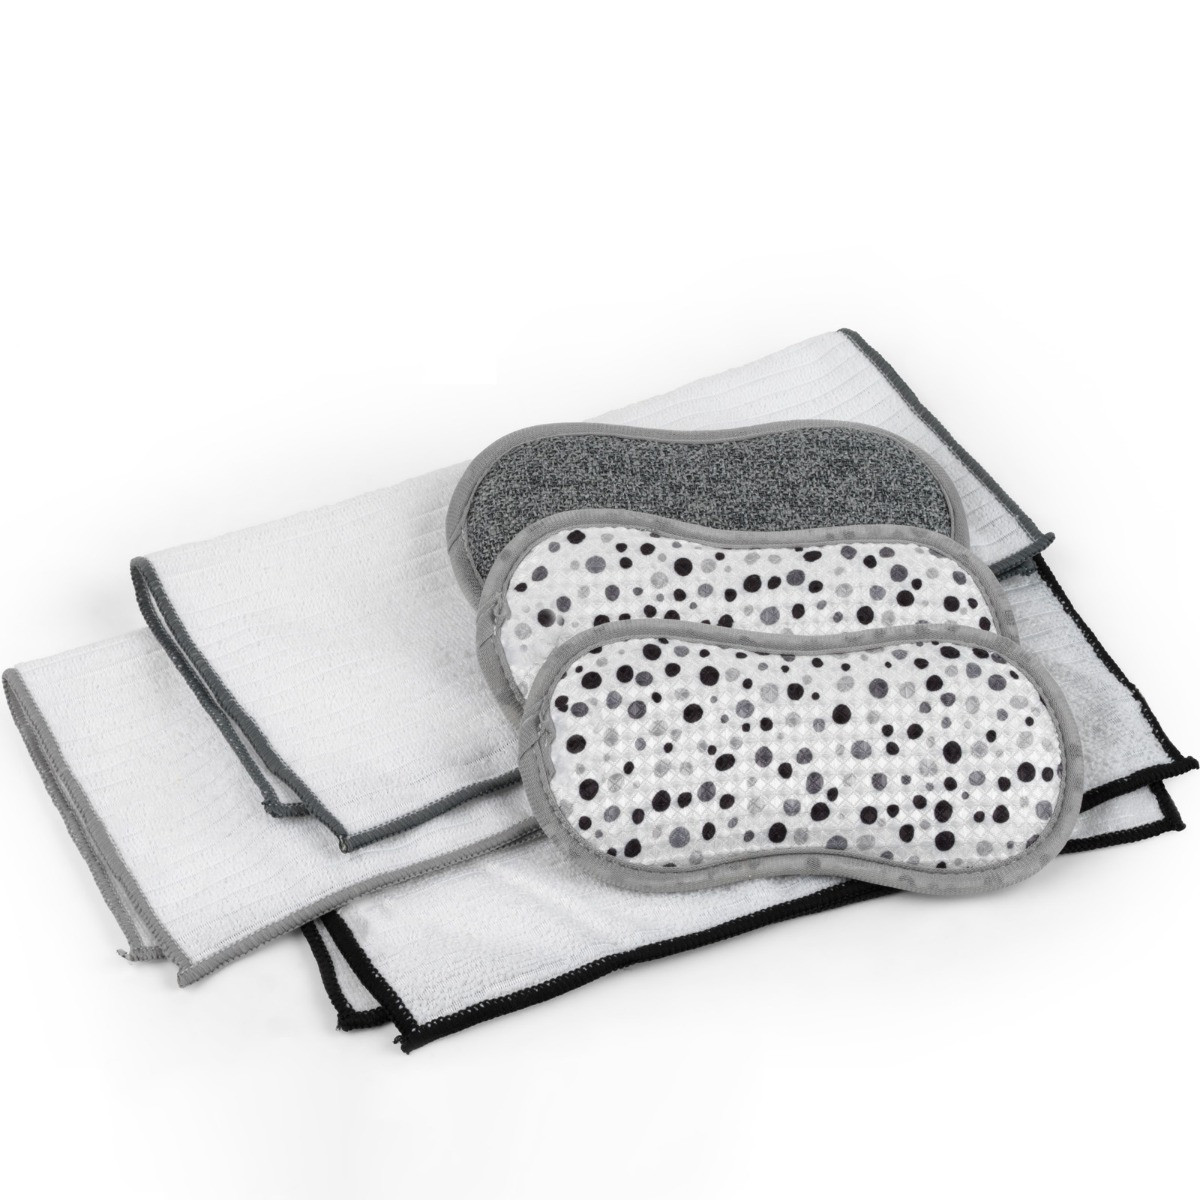 Beldray Cleaning Pads And Cloths, Silver - 6pk>